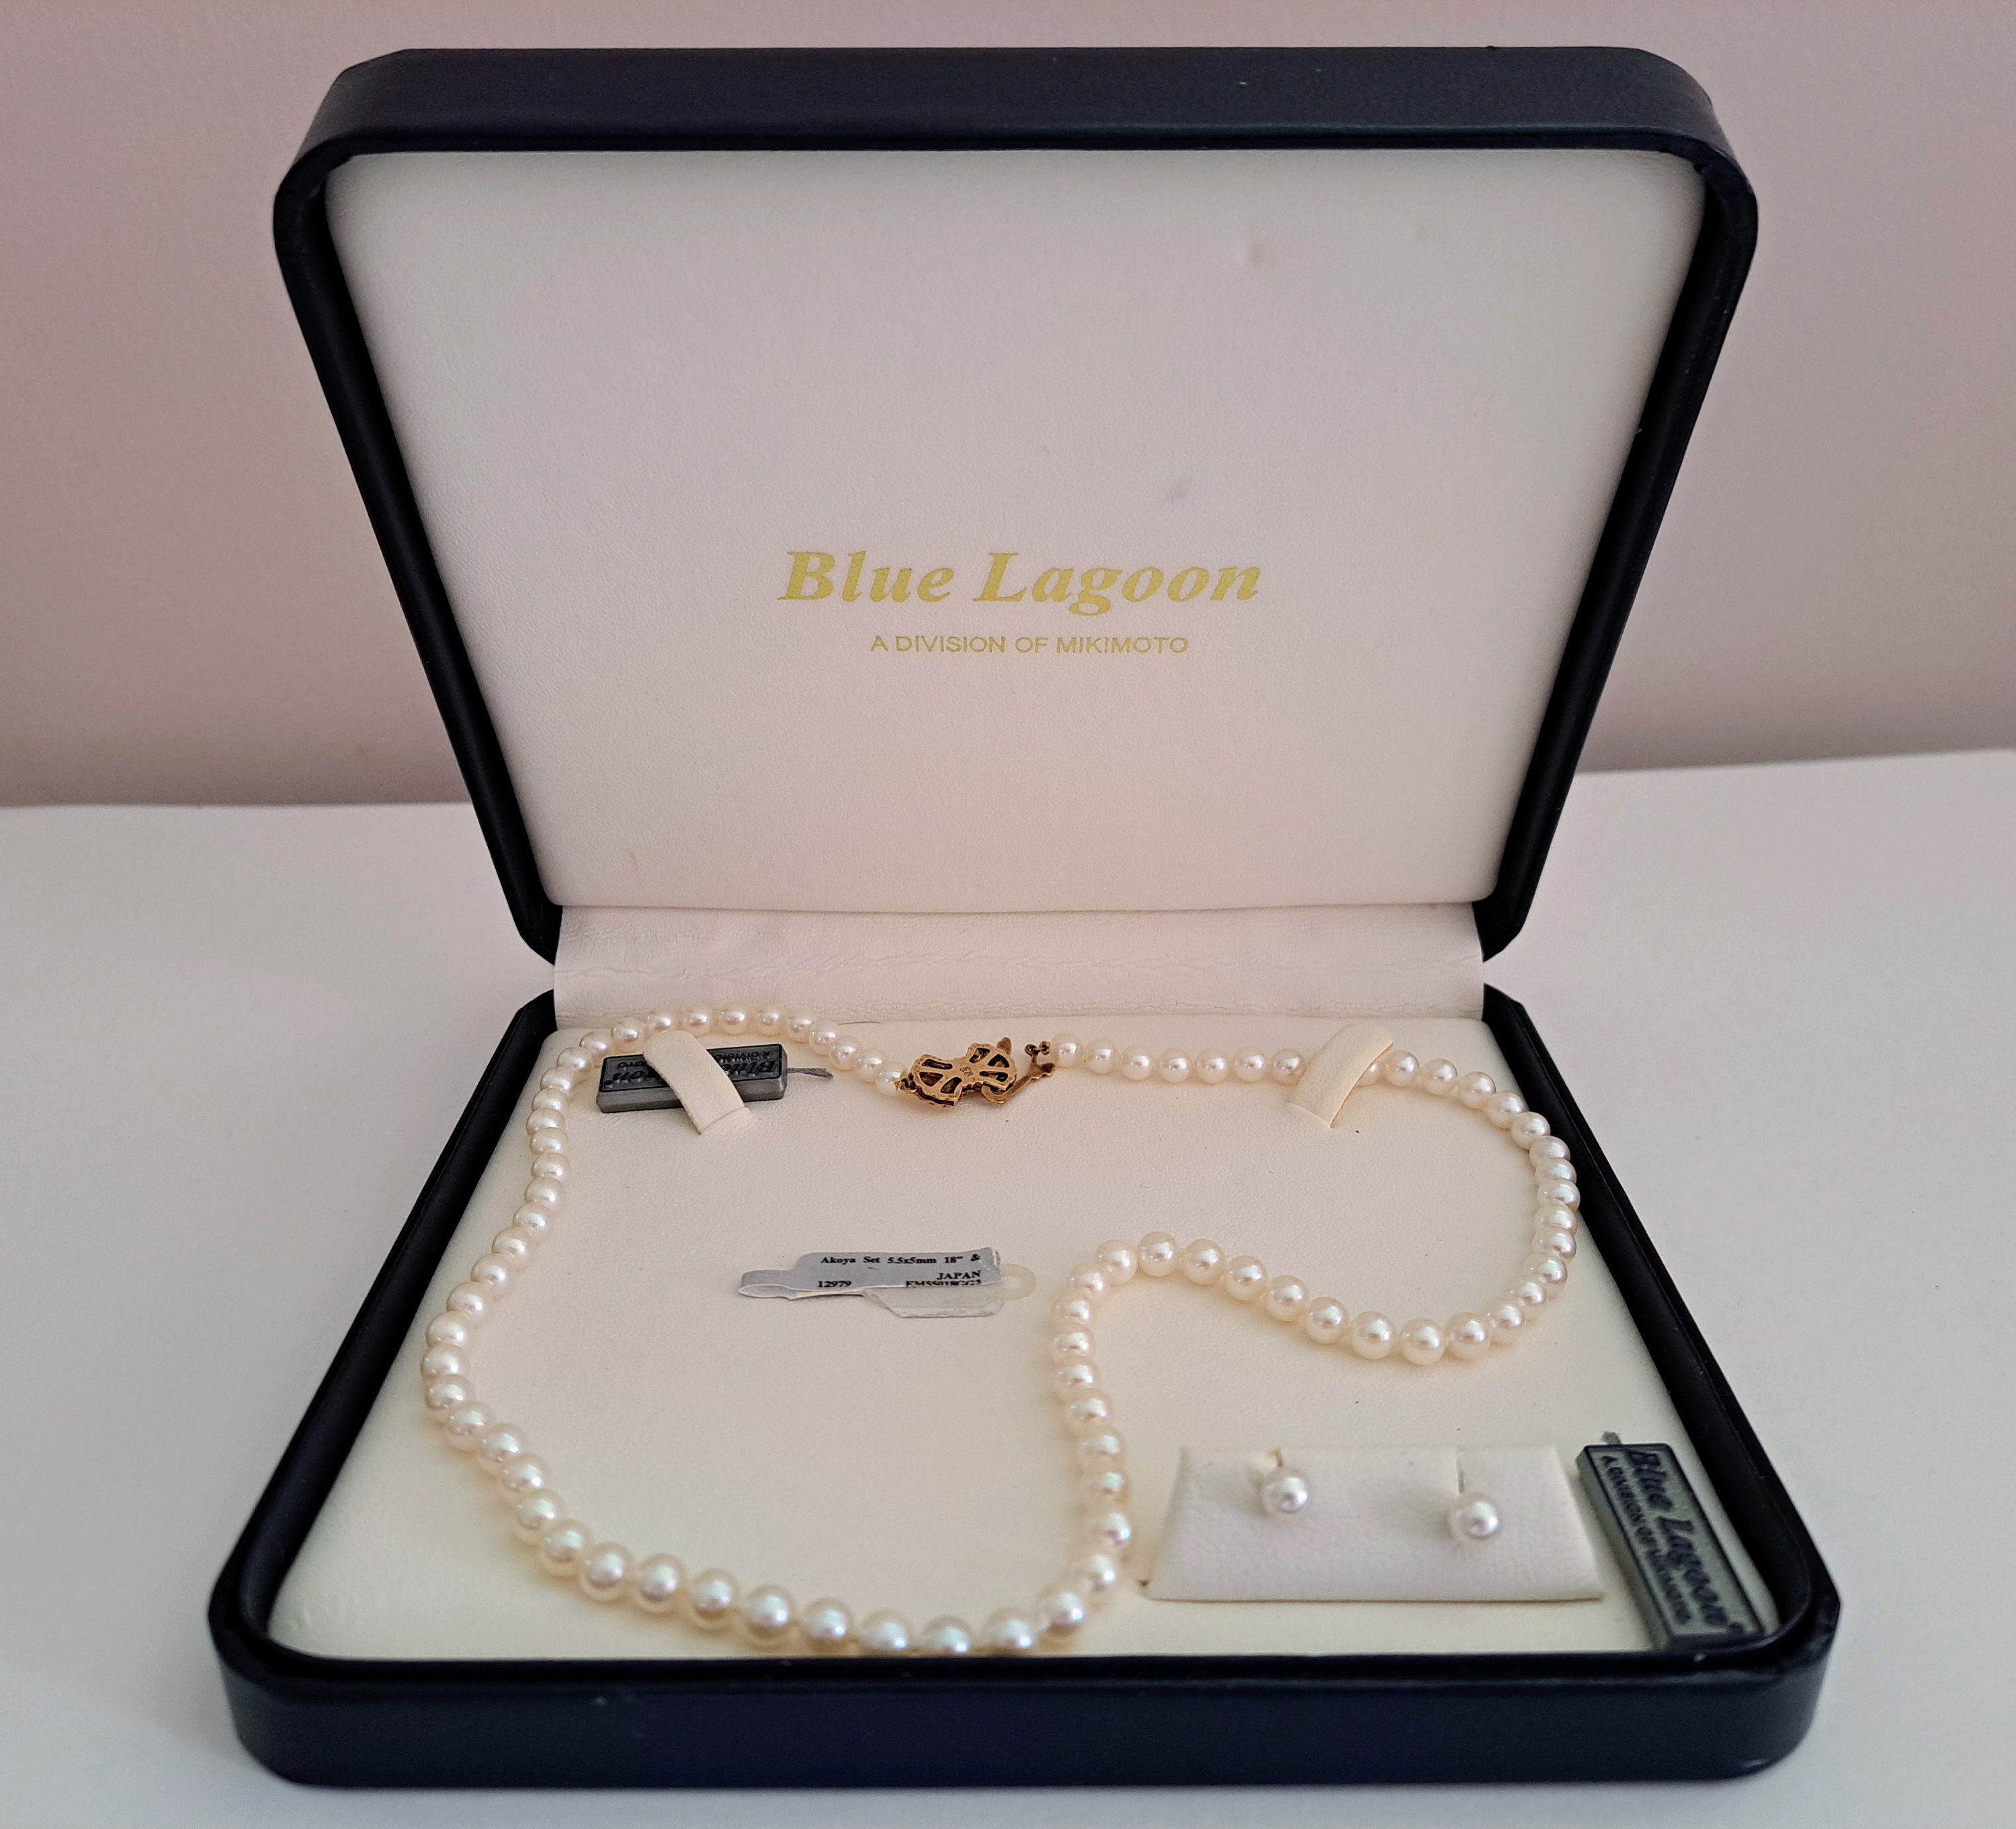 Mikimoto's Blue Lagoon Marilyn Monroe Pearl Necklace – Yeah It's Jewelry